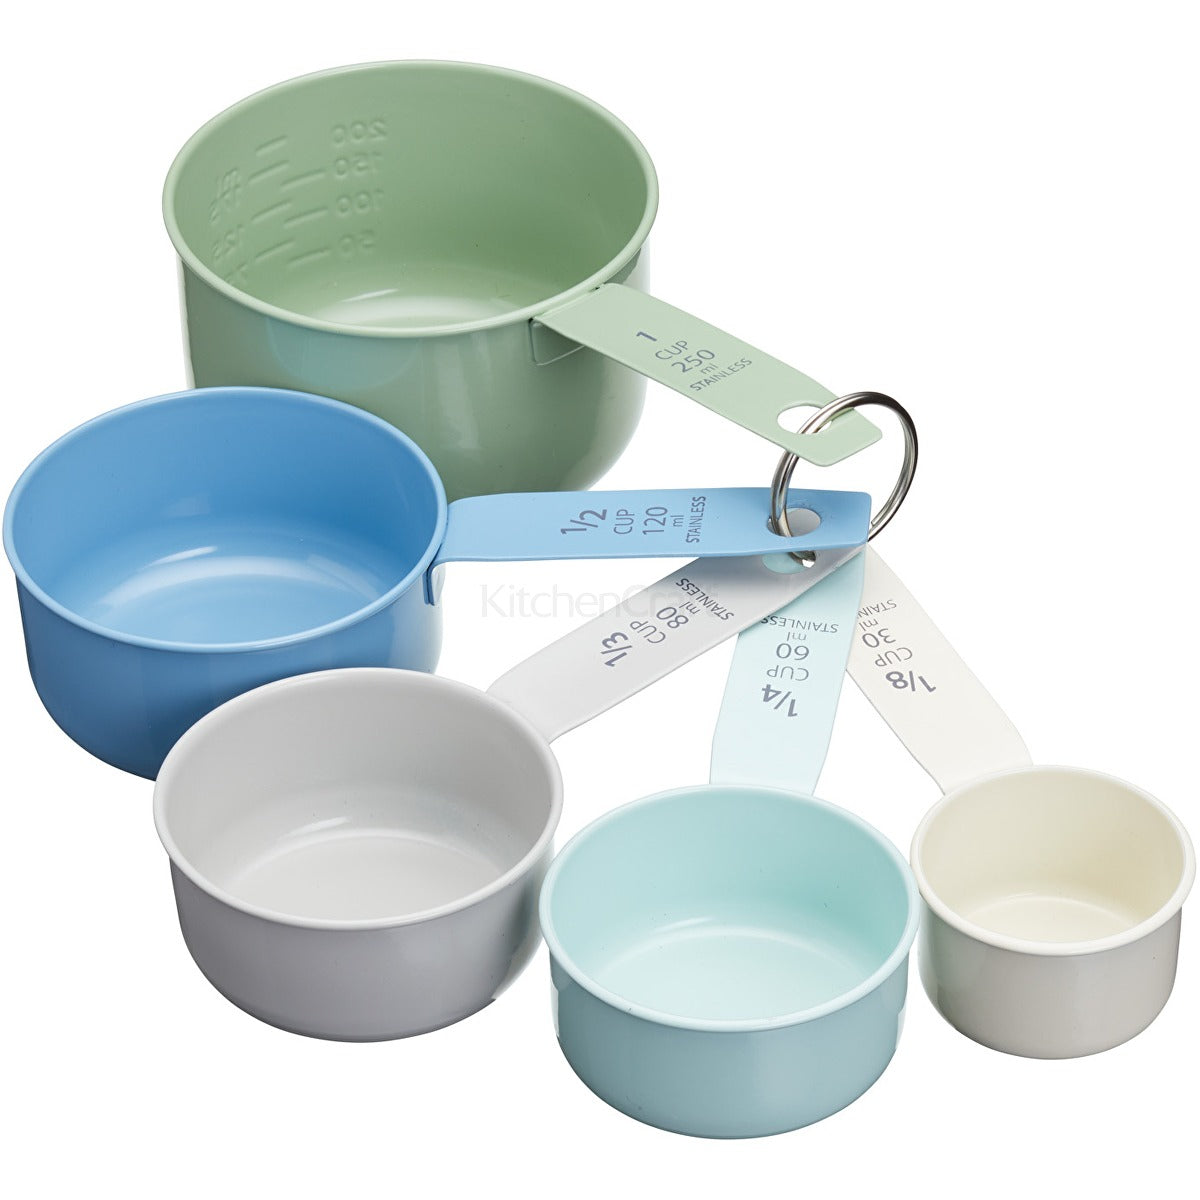 Living Nostalgia by KitchenCraft Vintage Look Measuring Cups